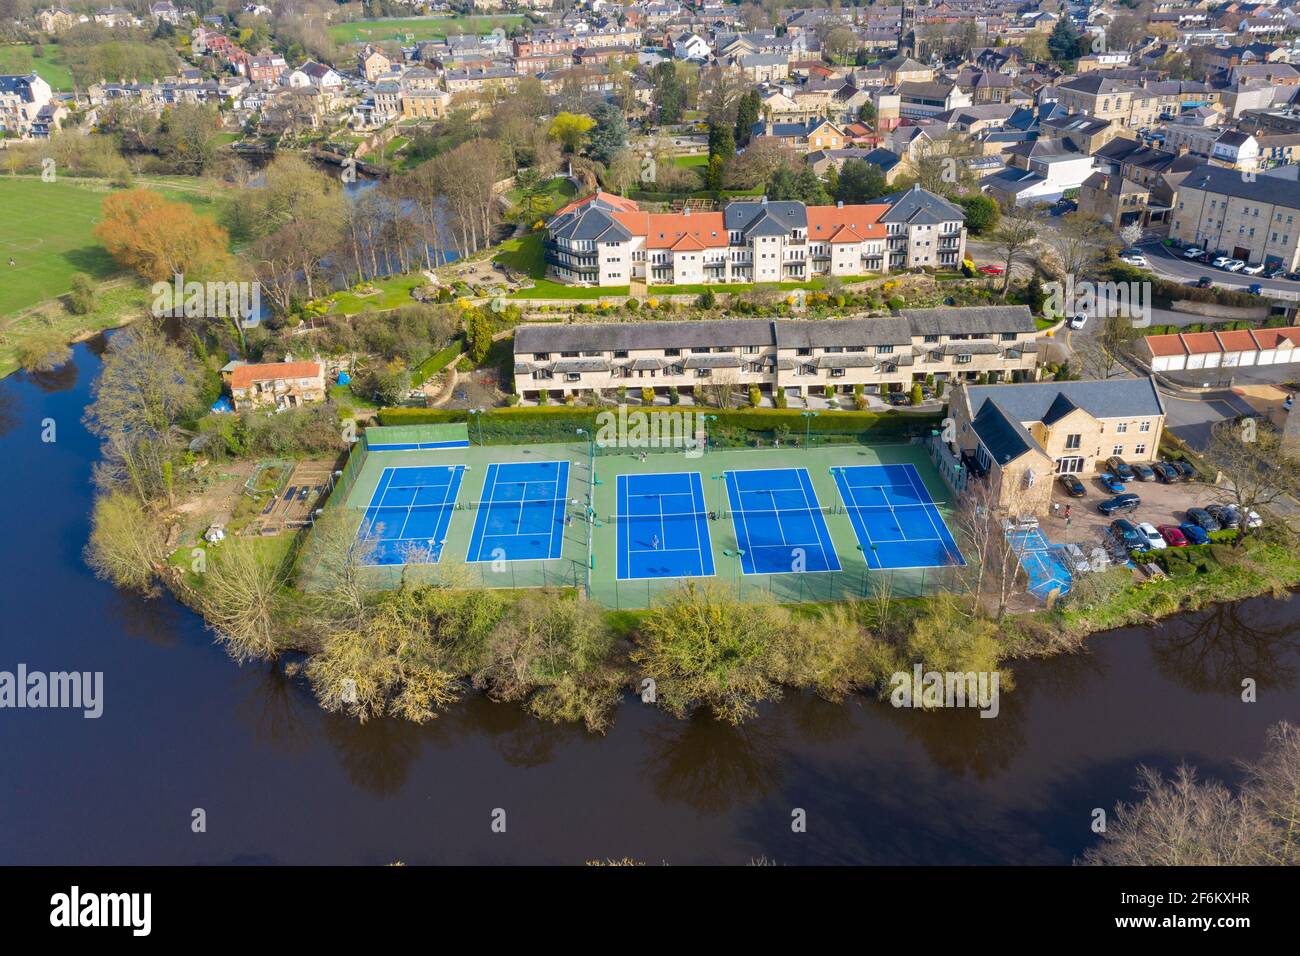 Aerial photo of the beautiful village of Wetherby in the UK showing rows of tennis courts near the river Stock Photo